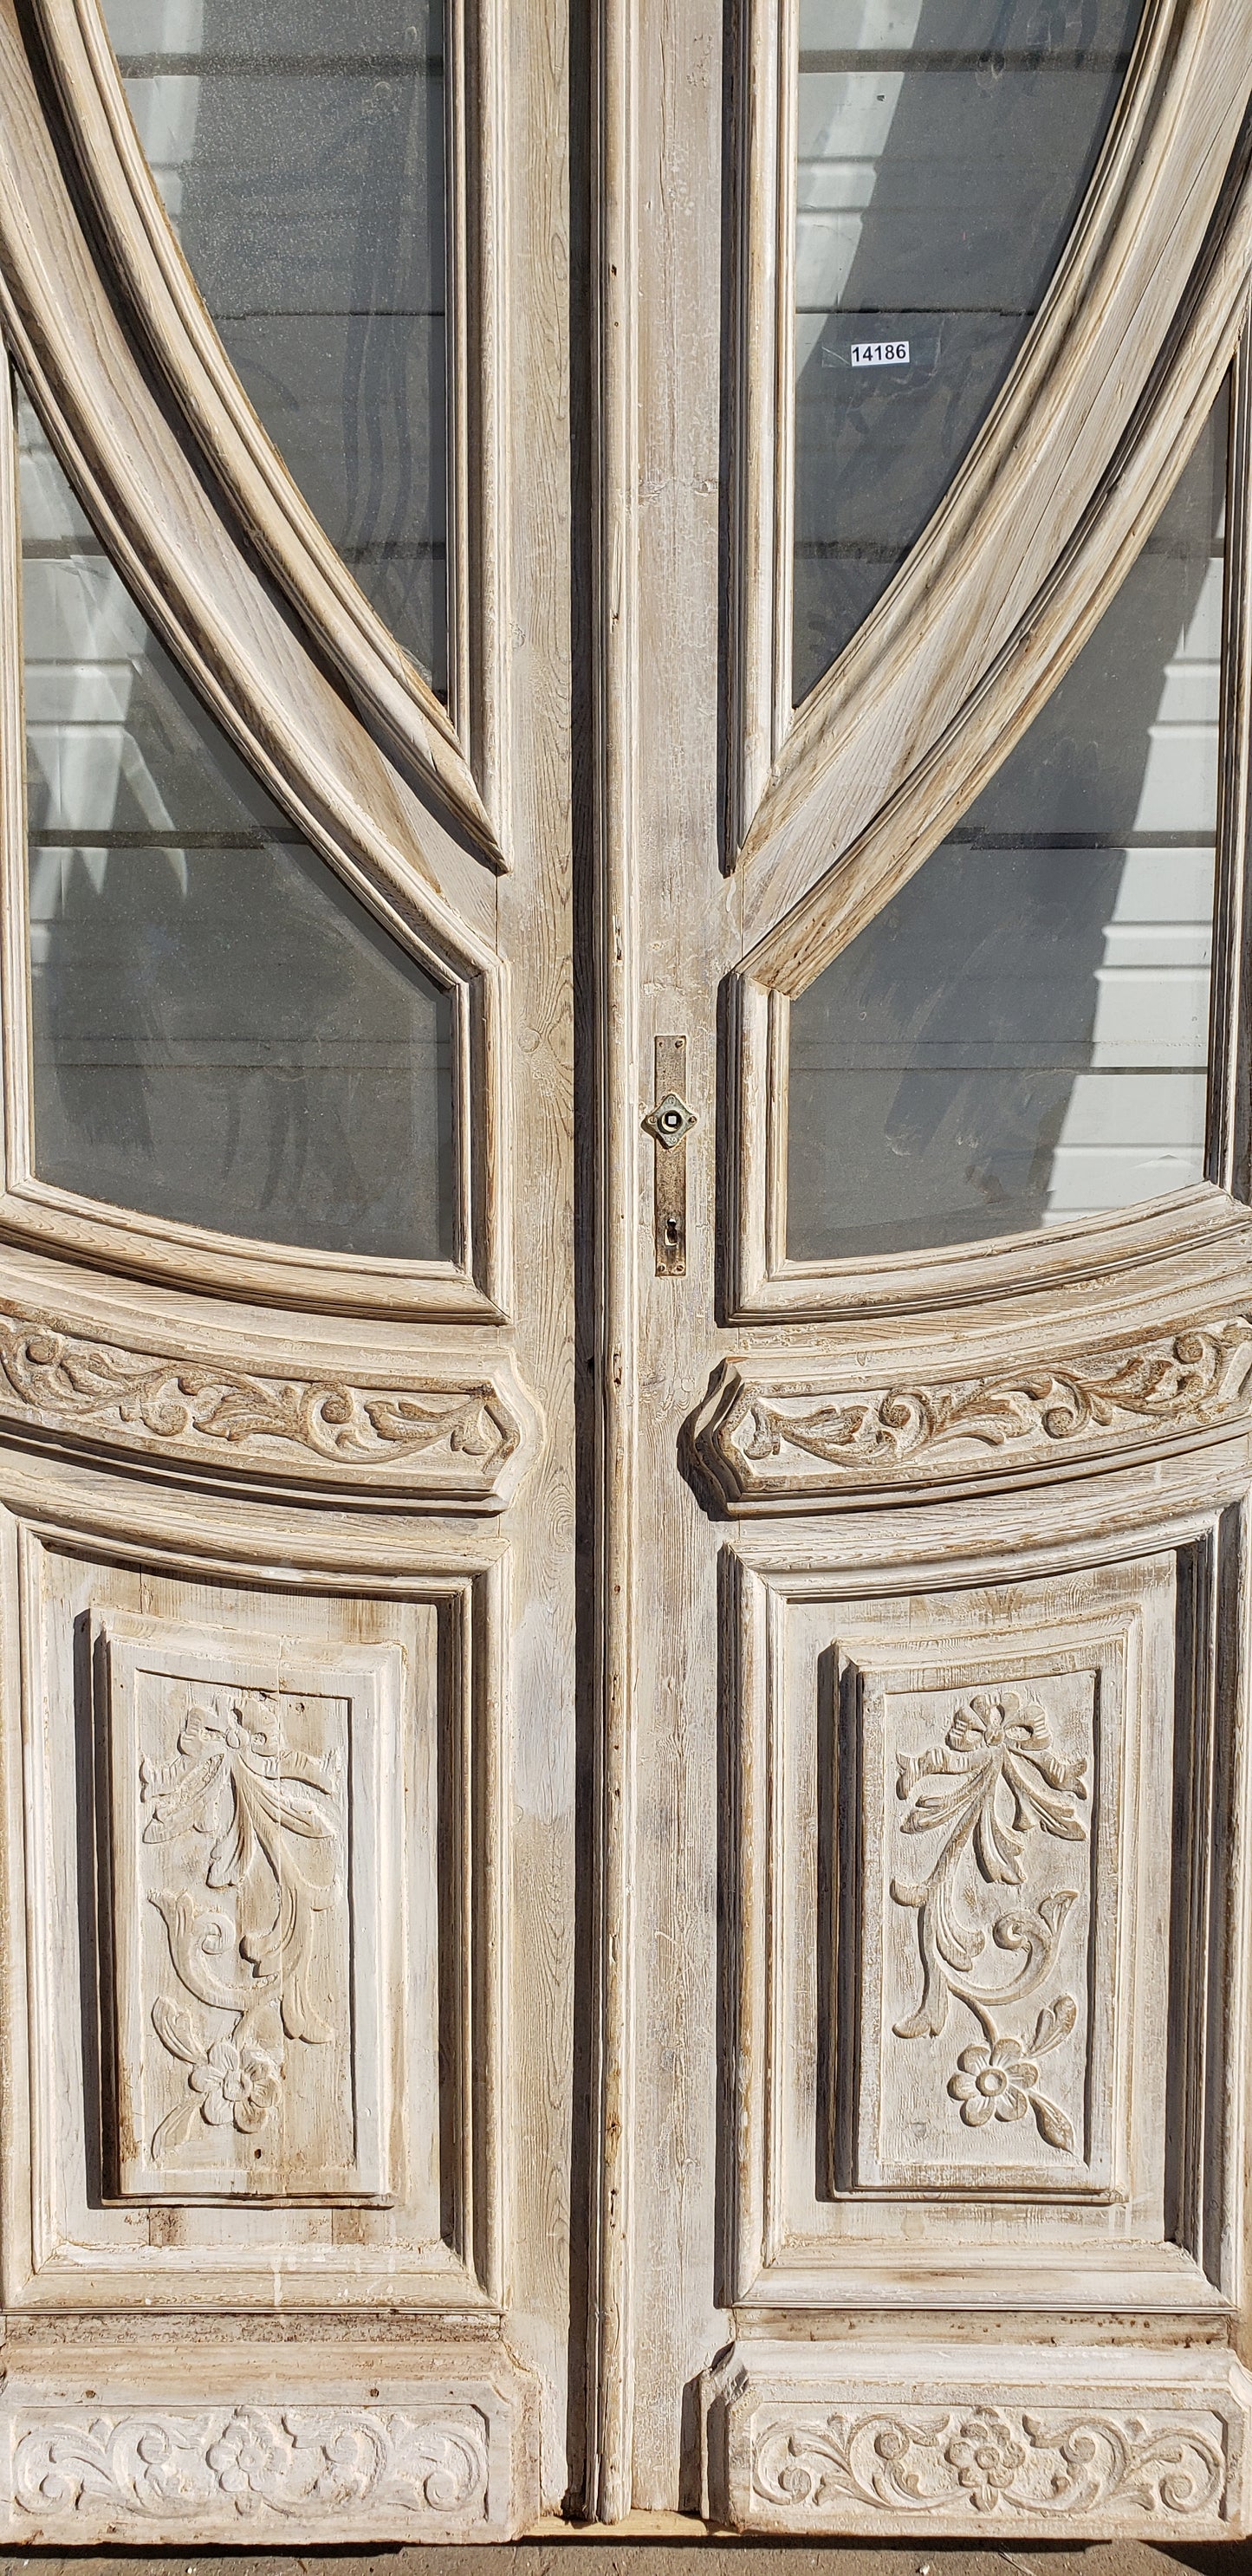 Pair of 2 Lite Antique Painted Doors in Frame with Transom Window